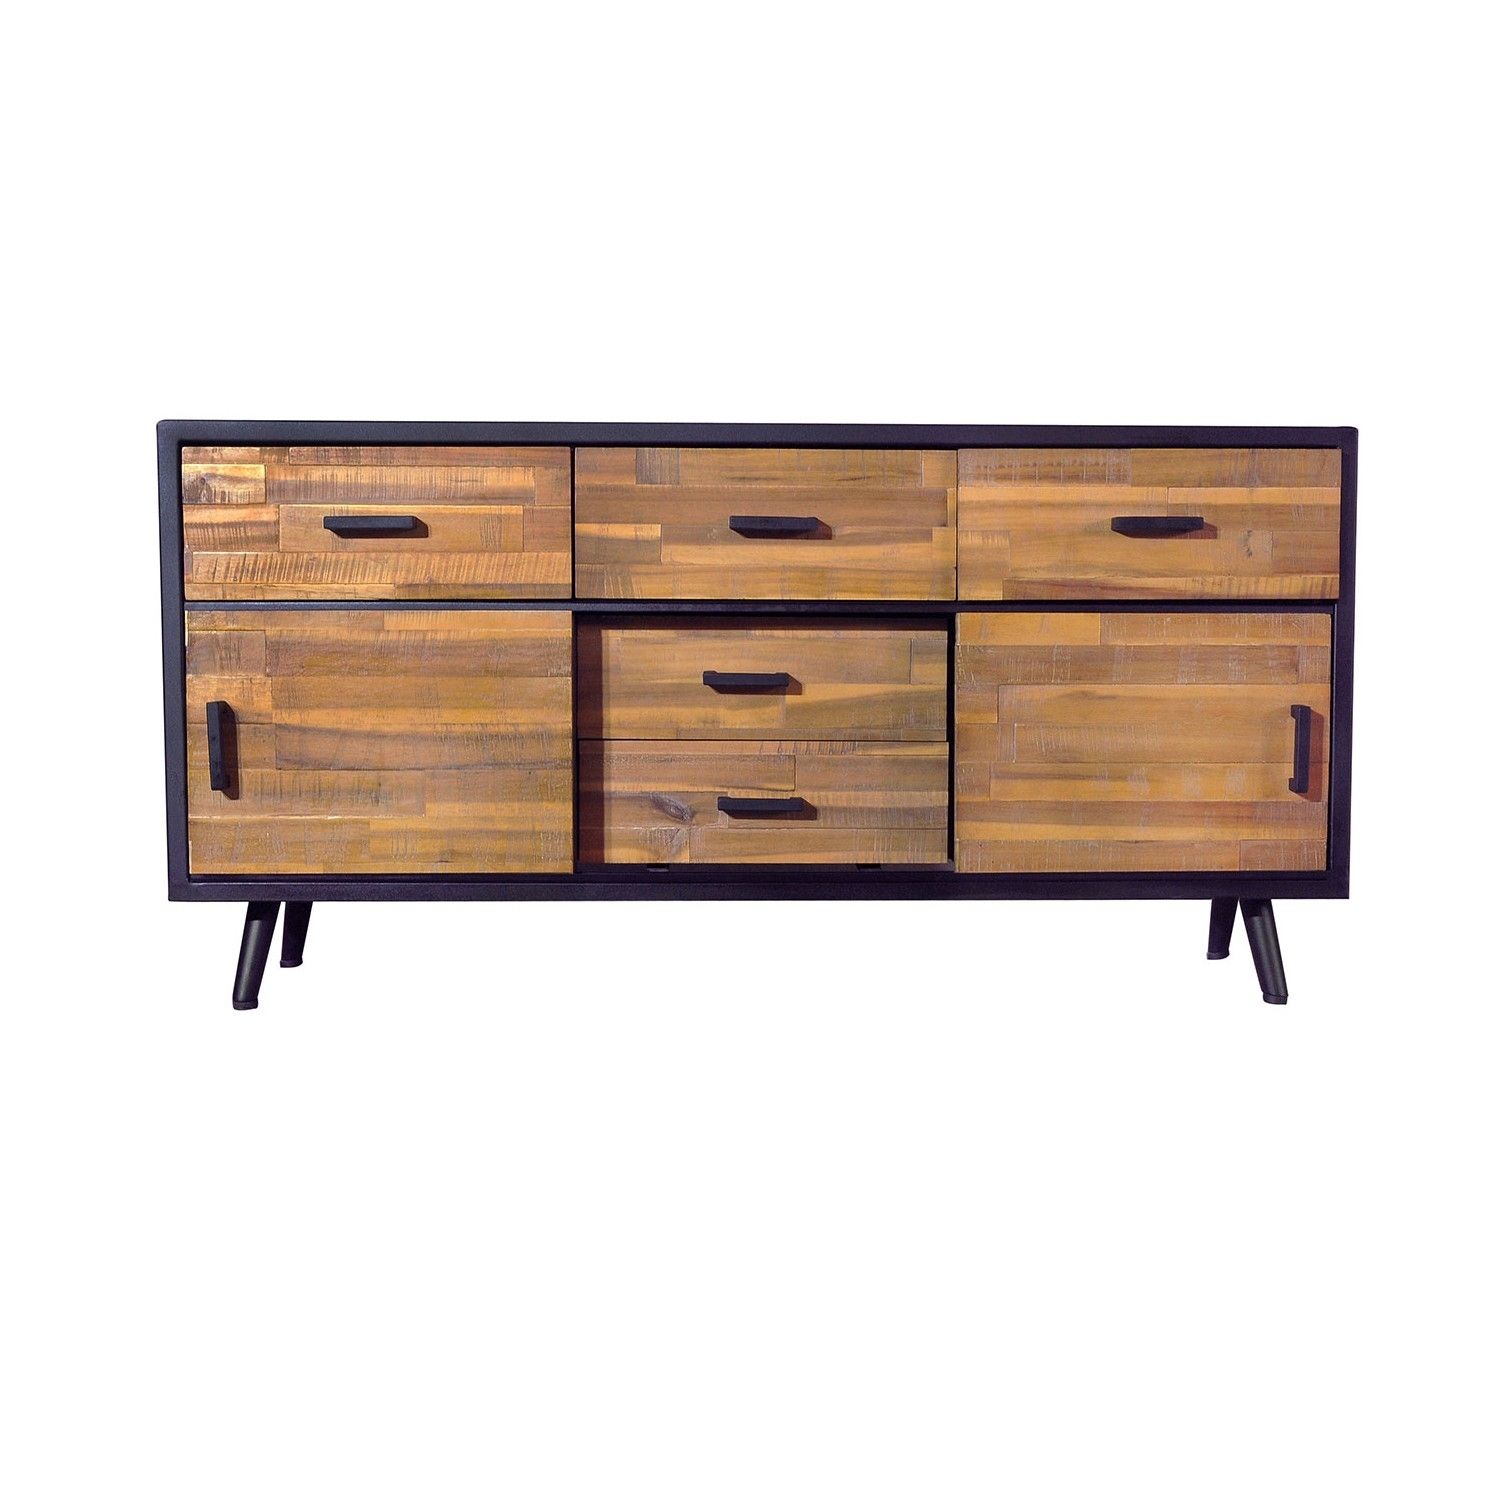 Buffets, Cabinets And Sideboards | Bois & Cuir In 2018 Metal Framed Reclaimed Wood Sideboards (View 16 of 20)